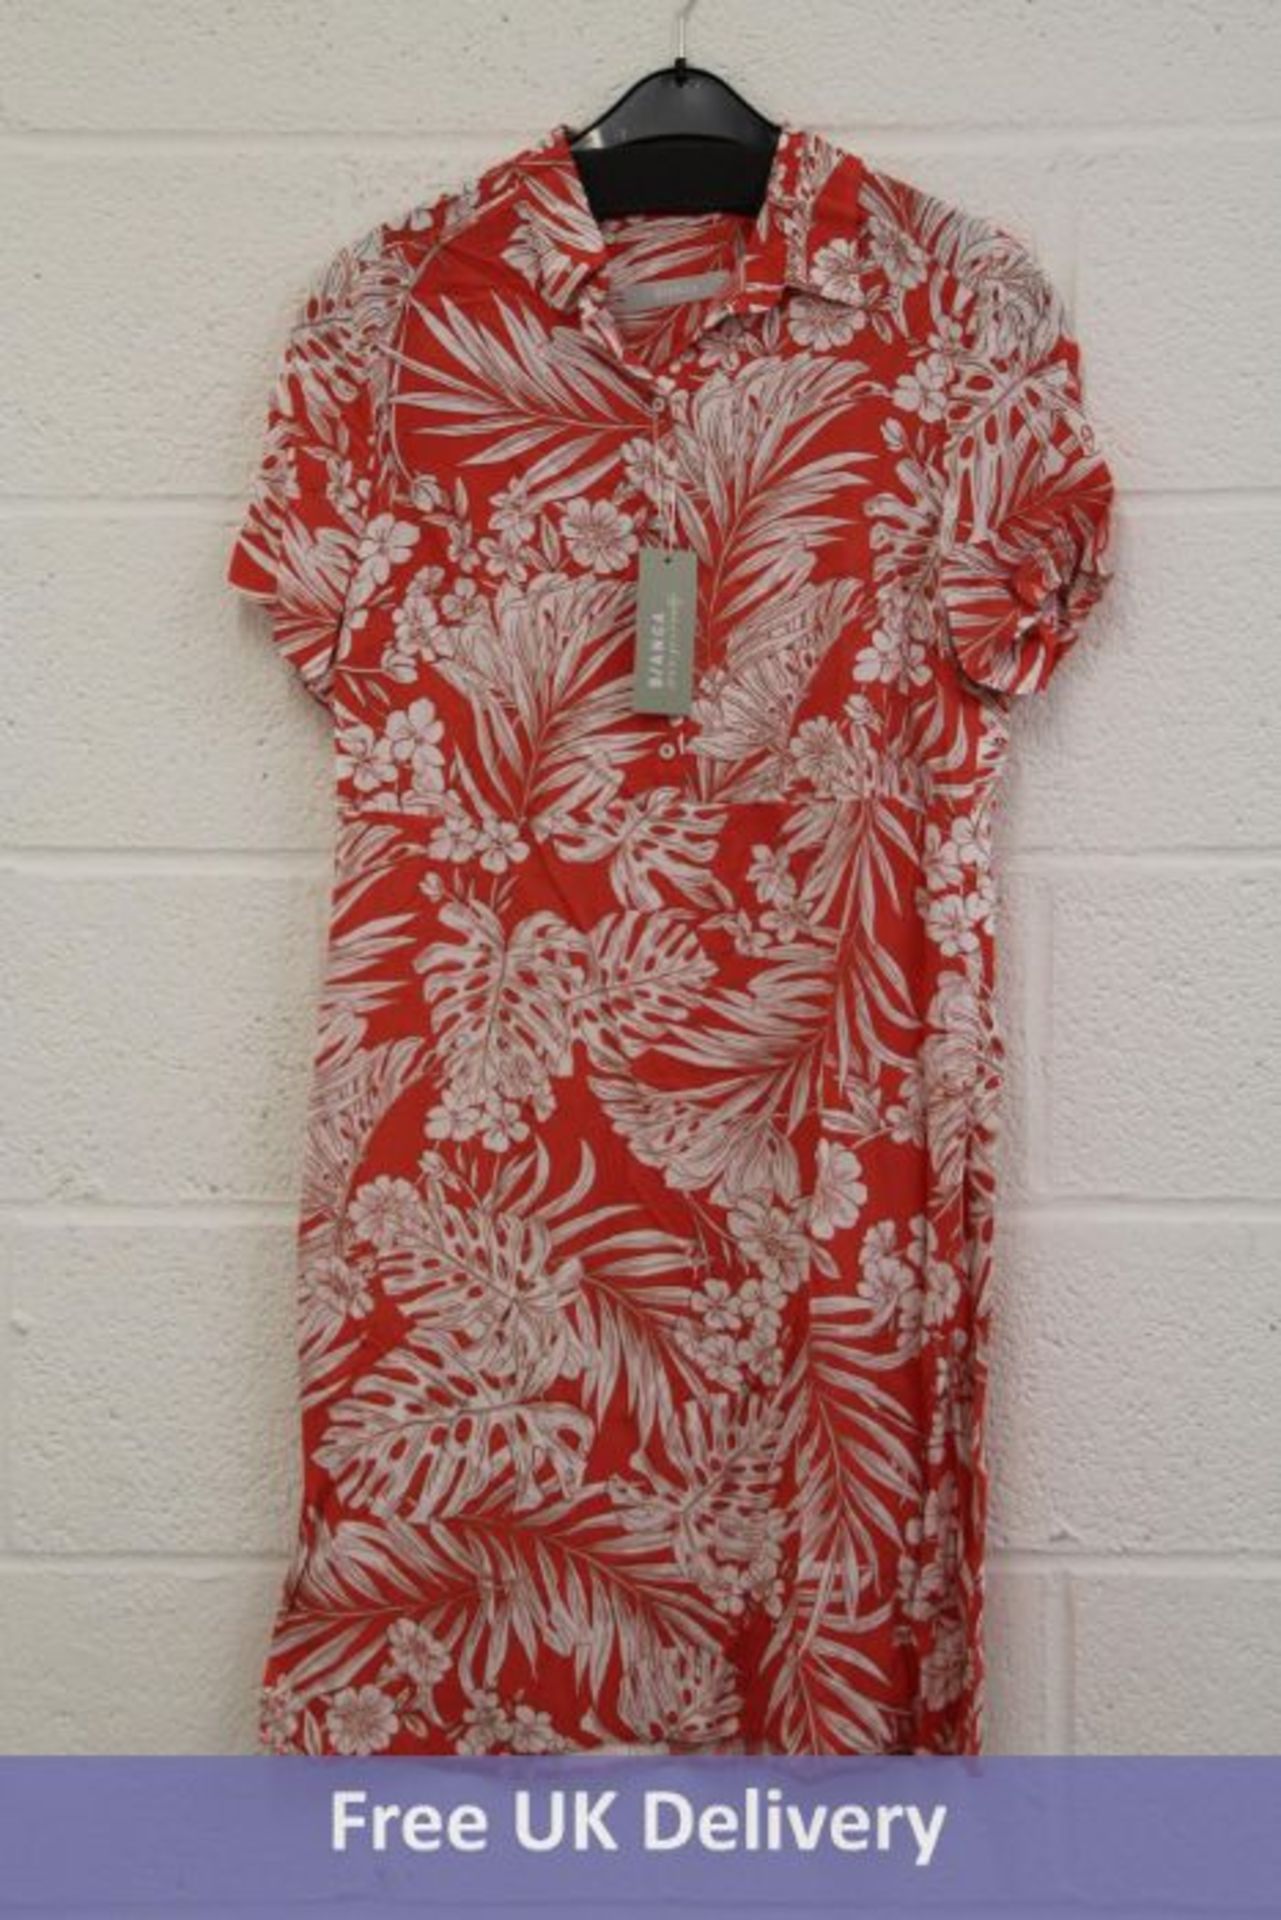 Jarrold And Sons Women's Clothing to include 1x Bianca, Dorine Short Sleeved Floral Dress, Red/White